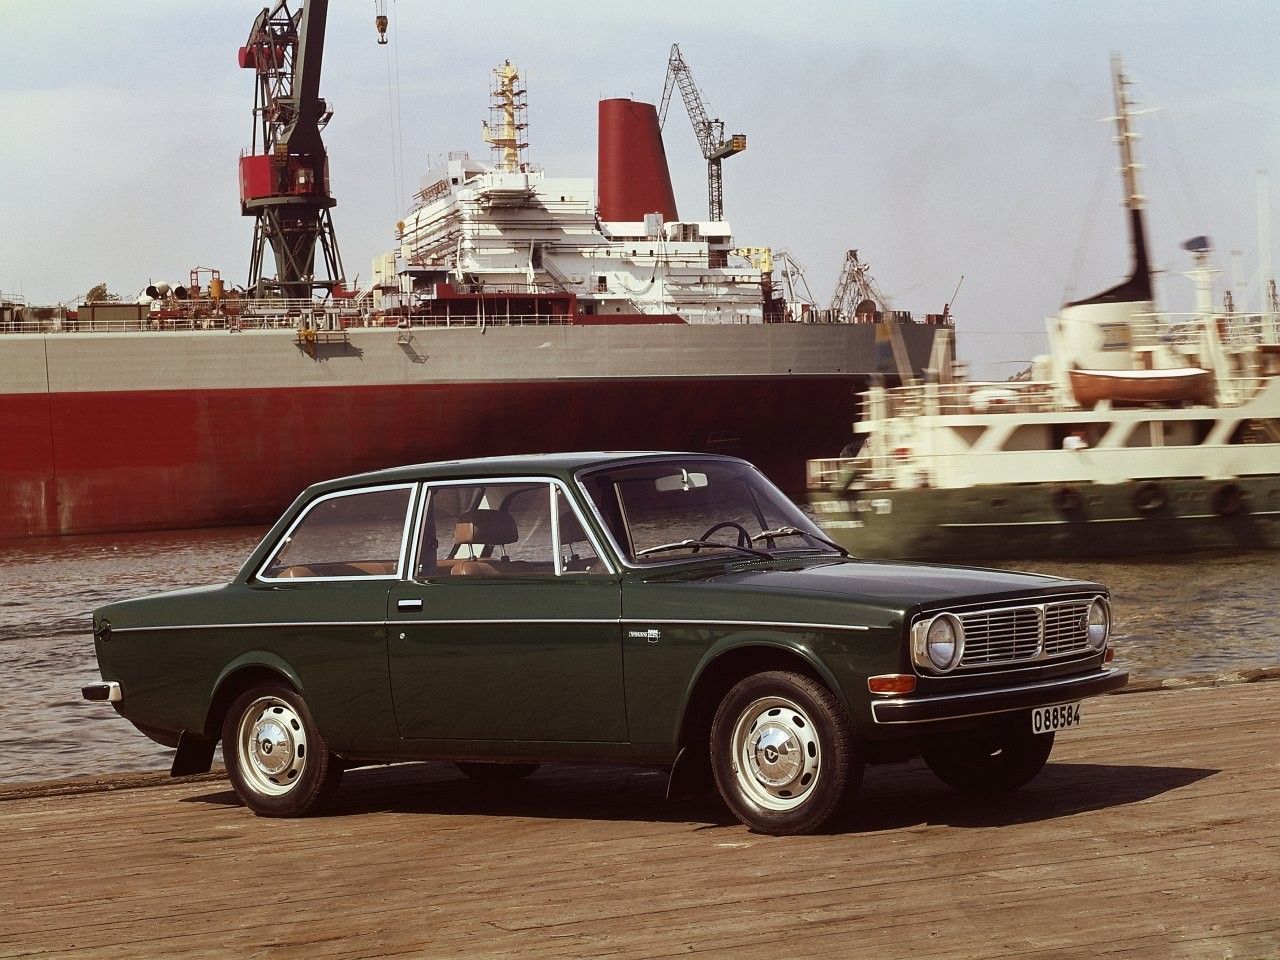 green Volvo 142 at sea in old photo